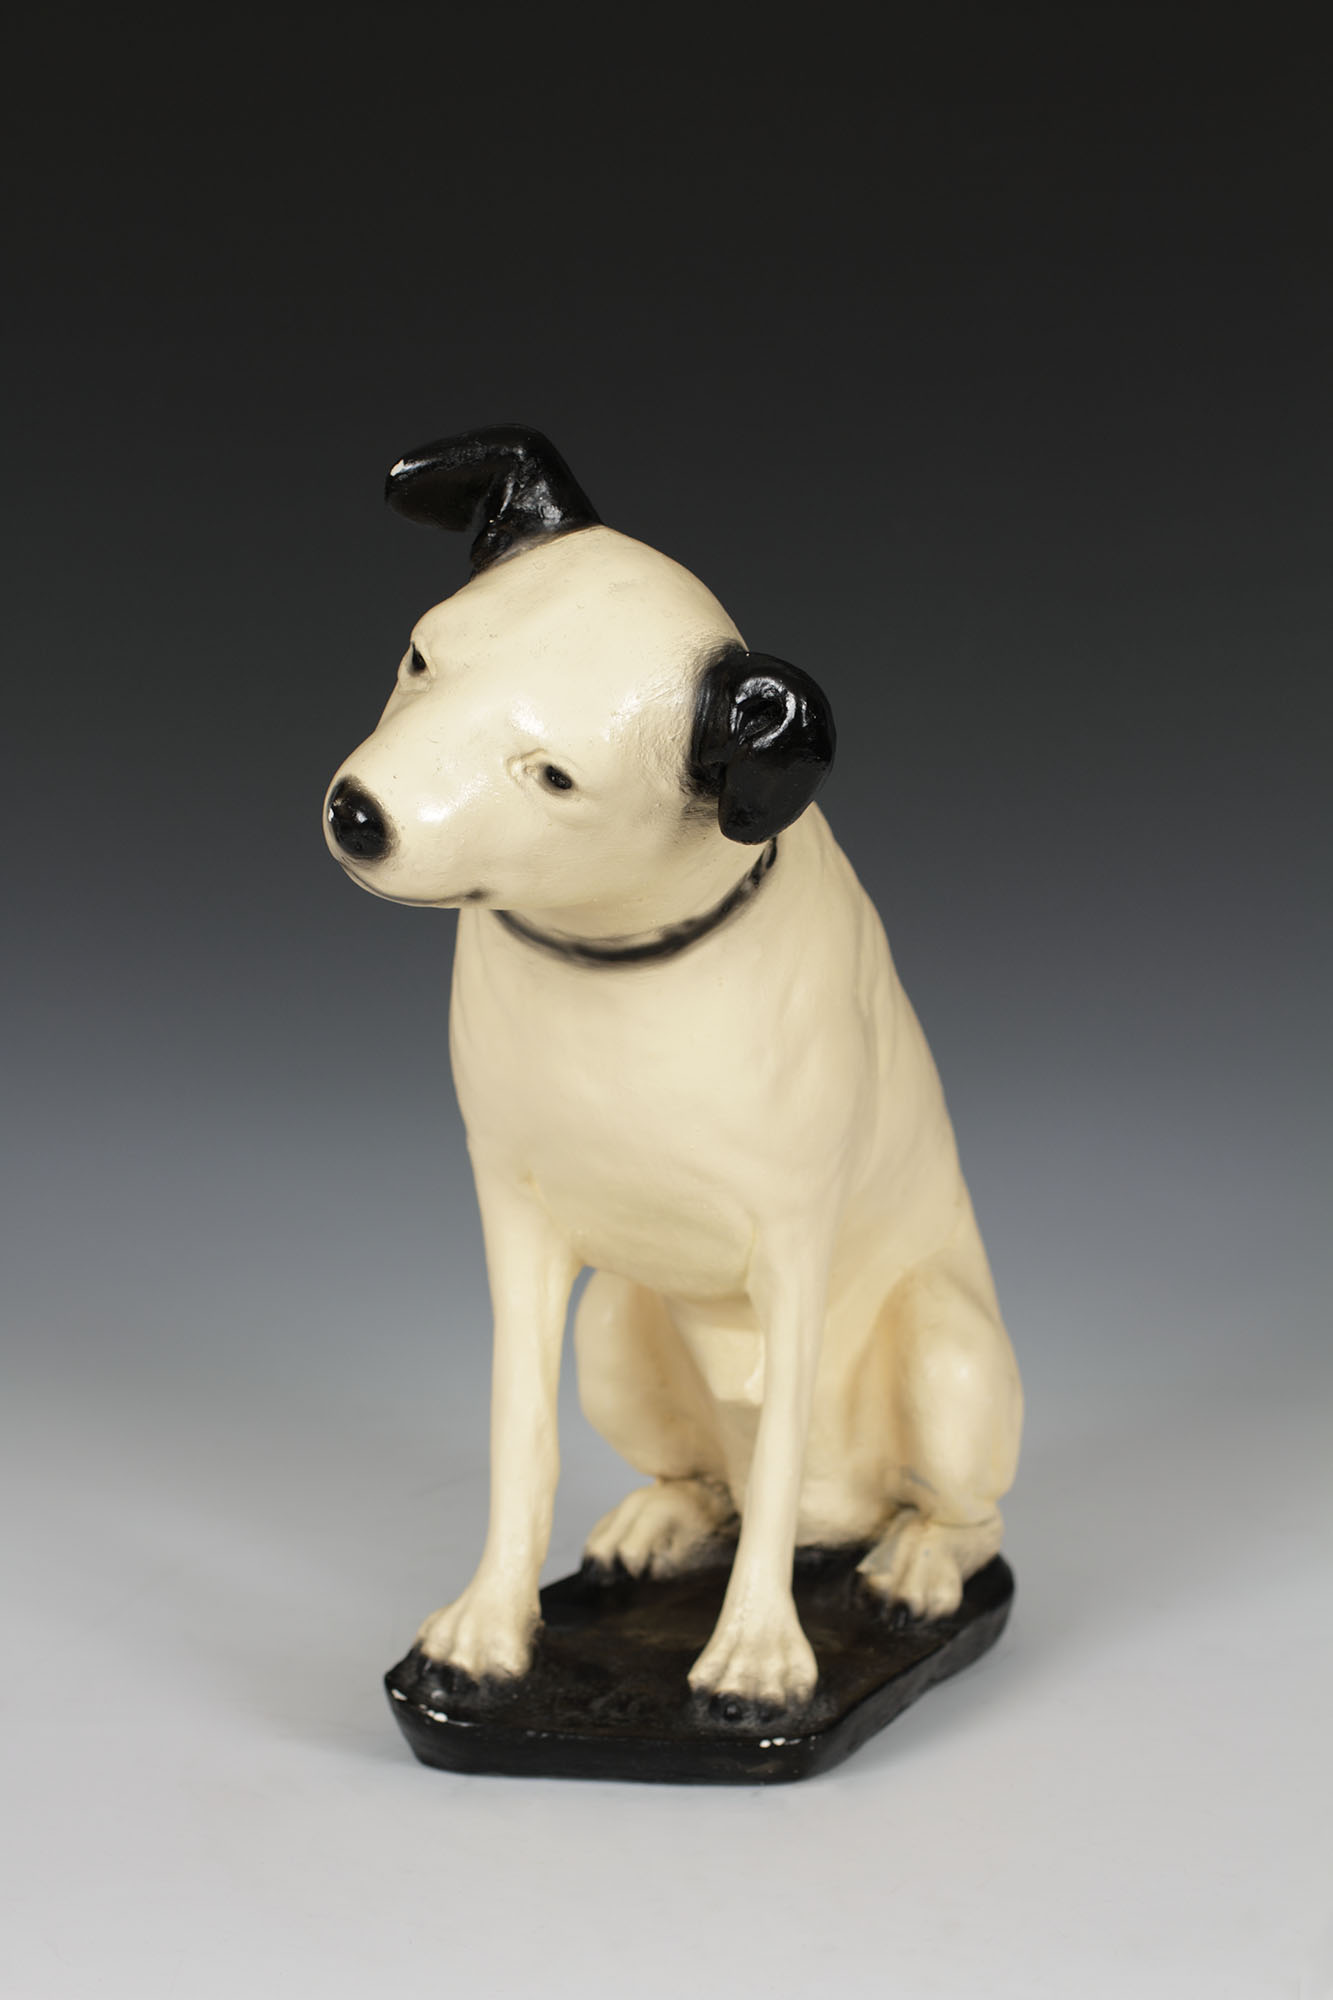 Nipper - Albany Institute of History and Art1333 x 2000